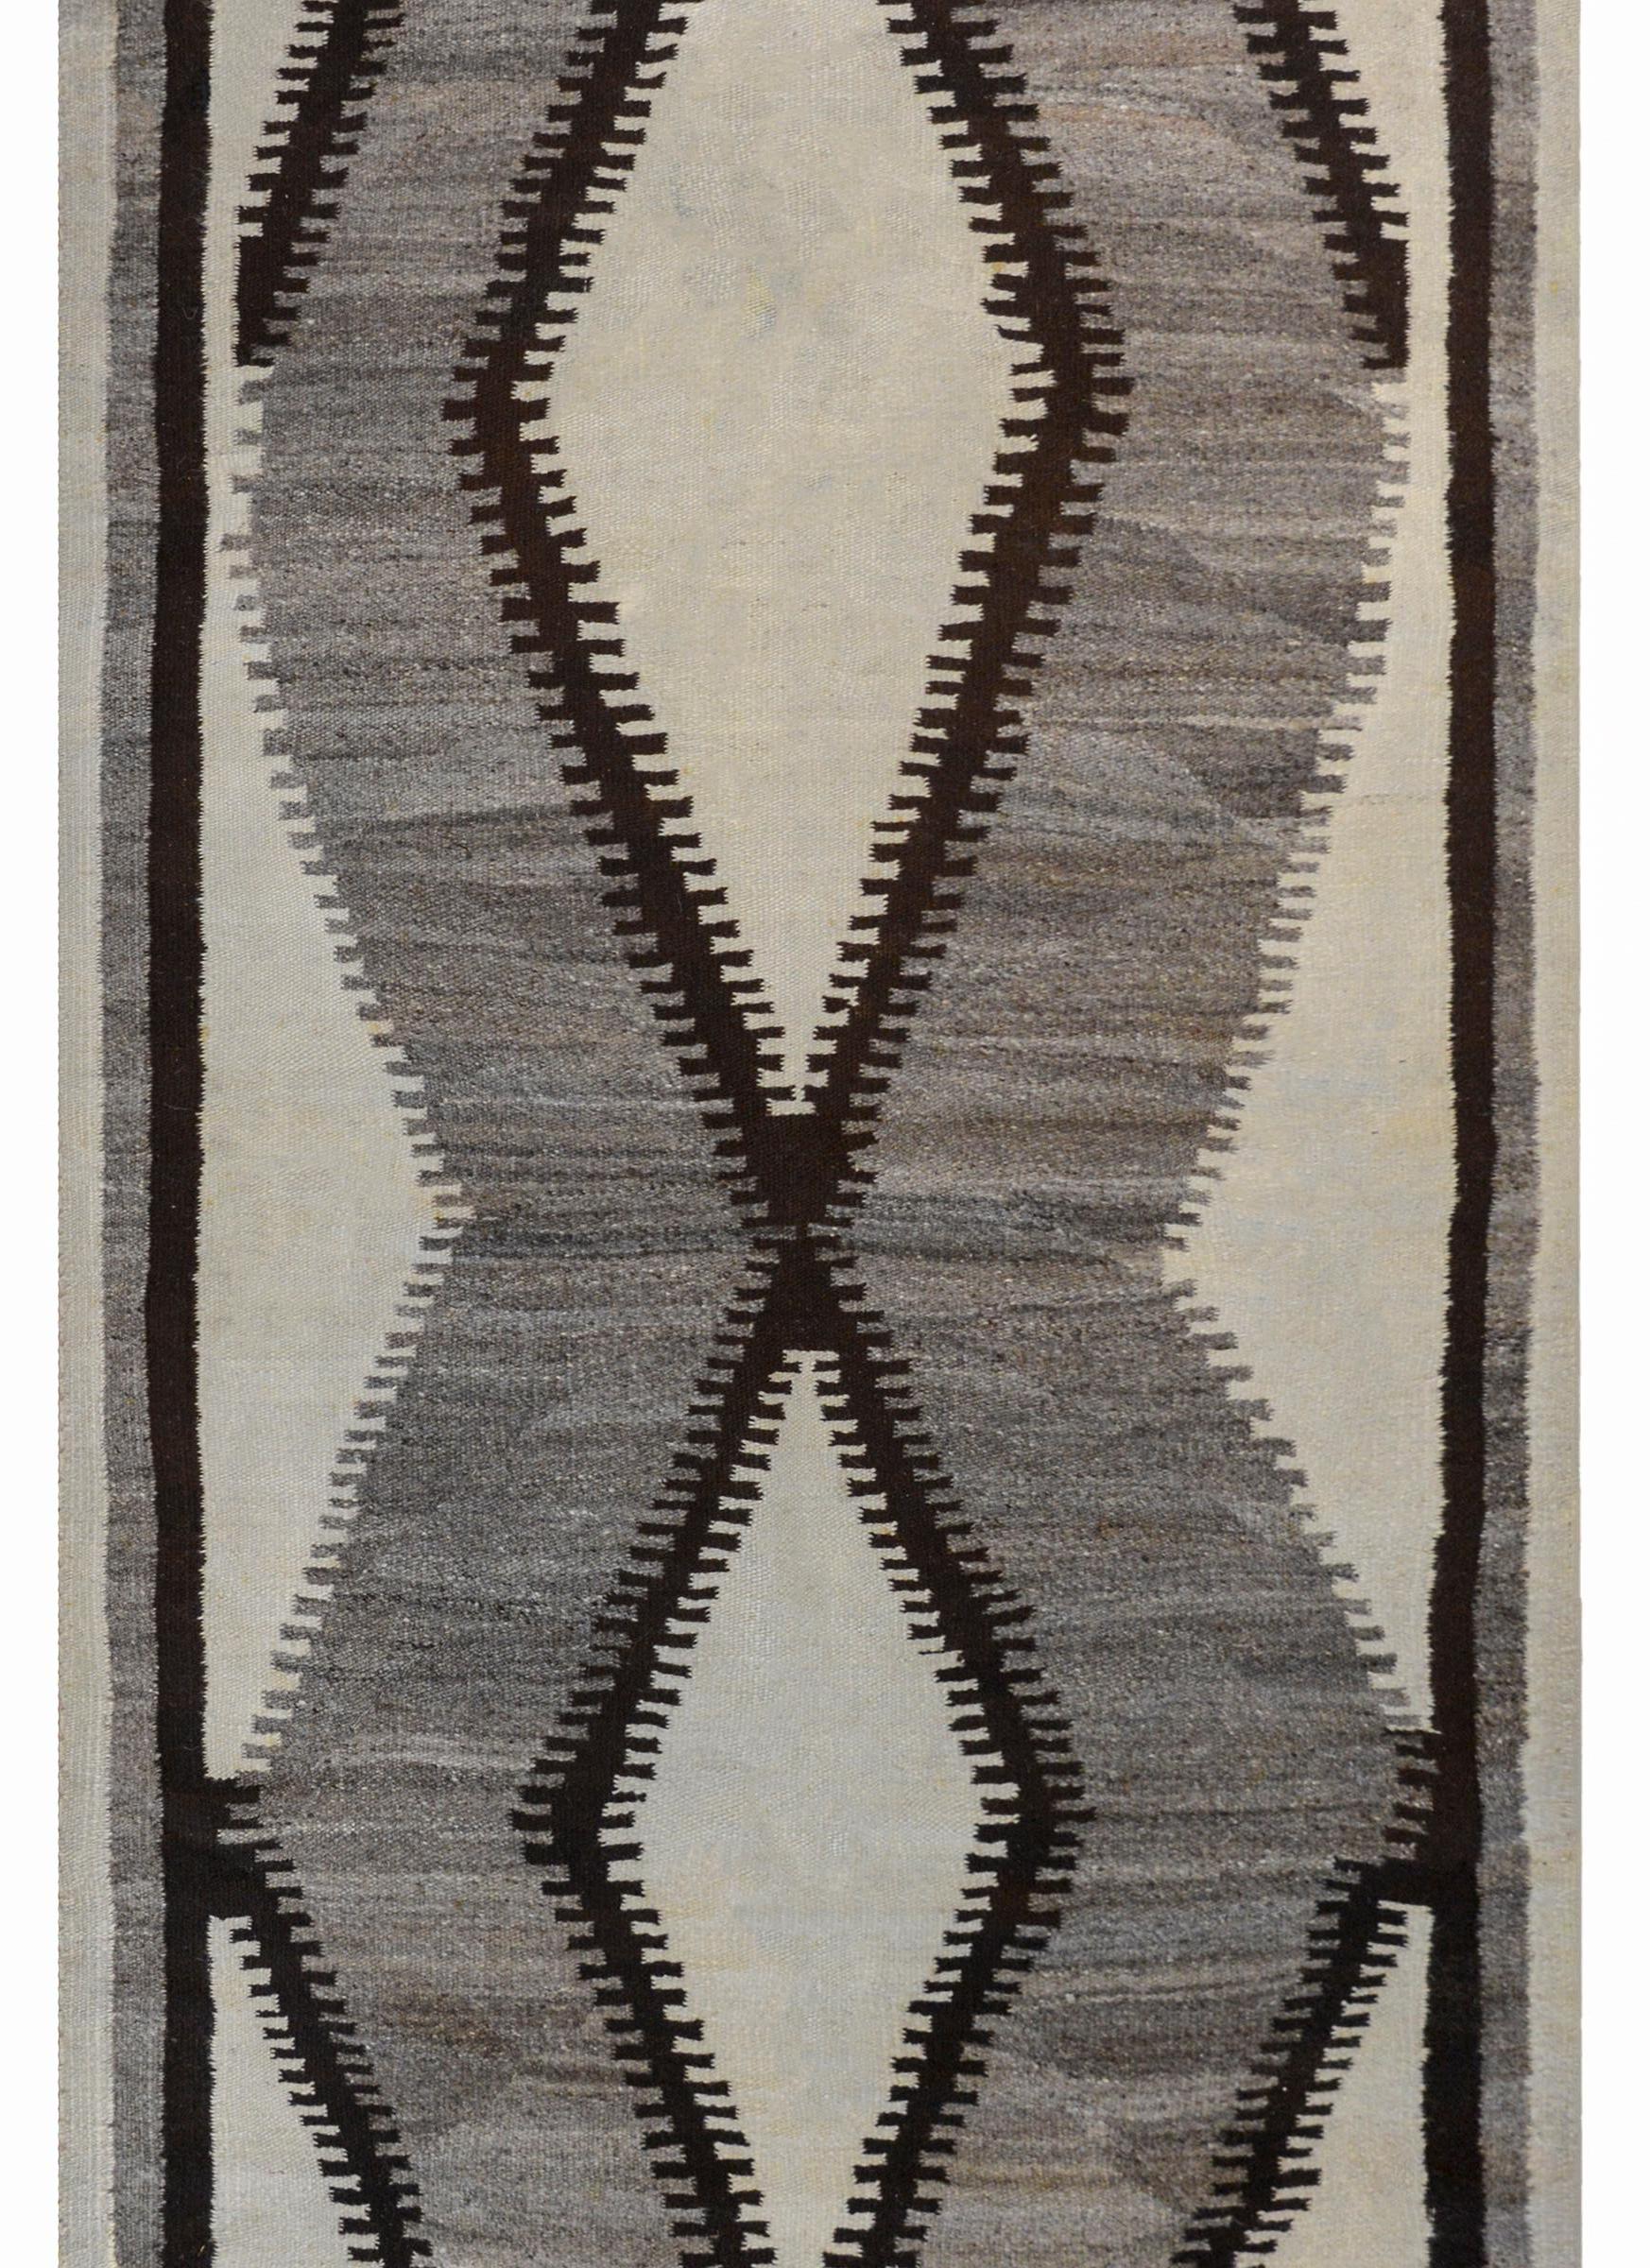 A beautiful early 20th century Navajo rug with a large-scale asymmetrical diamond pattern woven in varying shades of gray, black, and white surrounded by a solid stripe of each color.